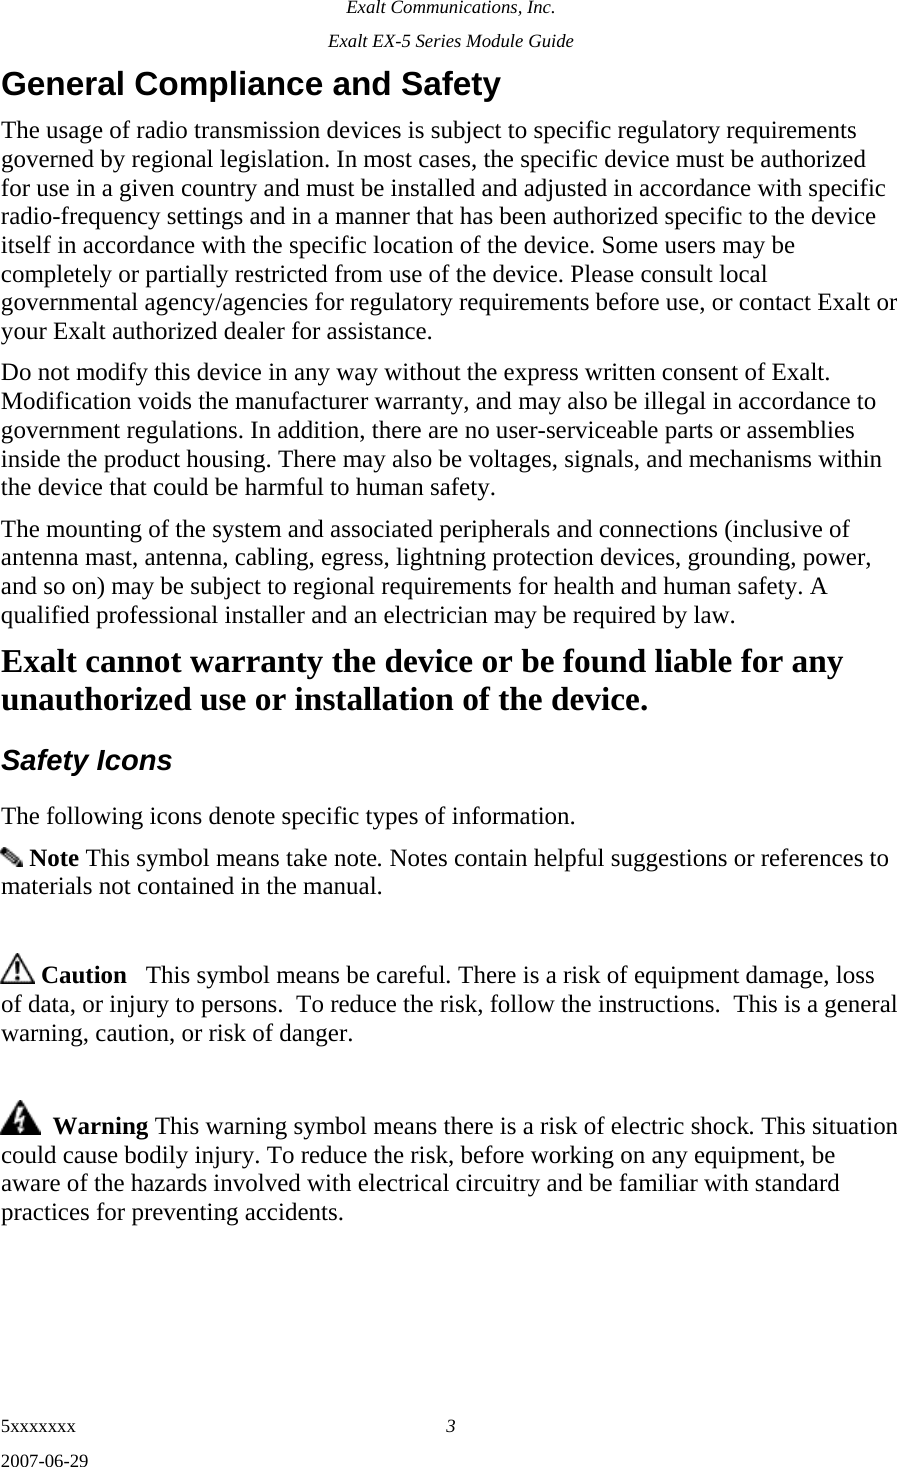 Exalt Communications, Inc. Exalt EX-5 Series Module Guide 5xxxxxxx  3 2007-06-29 General Compliance and Safety The usage of radio transmission devices is subject to specific regulatory requirements governed by regional legislation. In most cases, the specific device must be authorized for use in a given country and must be installed and adjusted in accordance with specific radio-frequency settings and in a manner that has been authorized specific to the device itself in accordance with the specific location of the device. Some users may be completely or partially restricted from use of the device. Please consult local governmental agency/agencies for regulatory requirements before use, or contact Exalt or your Exalt authorized dealer for assistance. Do not modify this device in any way without the express written consent of Exalt. Modification voids the manufacturer warranty, and may also be illegal in accordance to government regulations. In addition, there are no user-serviceable parts or assemblies inside the product housing. There may also be voltages, signals, and mechanisms within the device that could be harmful to human safety. The mounting of the system and associated peripherals and connections (inclusive of antenna mast, antenna, cabling, egress, lightning protection devices, grounding, power, and so on) may be subject to regional requirements for health and human safety. A qualified professional installer and an electrician may be required by law. Exalt cannot warranty the device or be found liable for any unauthorized use or installation of the device. Safety Icons   The following icons denote specific types of information.  Note This symbol means take note. Notes contain helpful suggestions or references to materials not contained in the manual.   Caution   This symbol means be careful. There is a risk of equipment damage, loss of data, or injury to persons.  To reduce the risk, follow the instructions.  This is a general warning, caution, or risk of danger.    Warning This warning symbol means there is a risk of electric shock. This situation could cause bodily injury. To reduce the risk, before working on any equipment, be aware of the hazards involved with electrical circuitry and be familiar with standard practices for preventing accidents.    